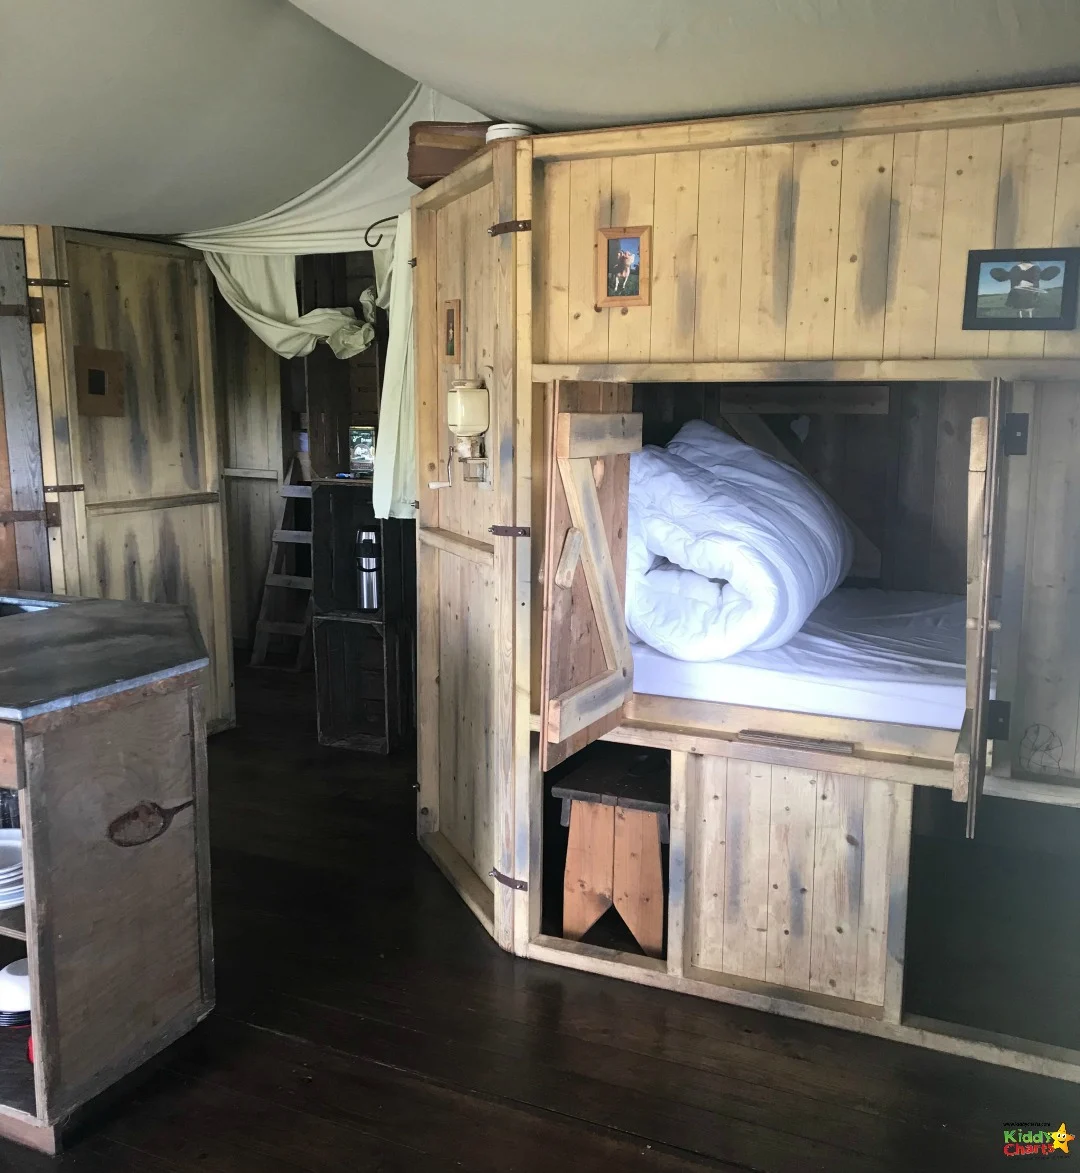 The kids just LOVED to be able to sleep inside the cupboard in the glamping location we reviewed: Featherdown. Go check it out! #travel #glamping #uktravel #kids